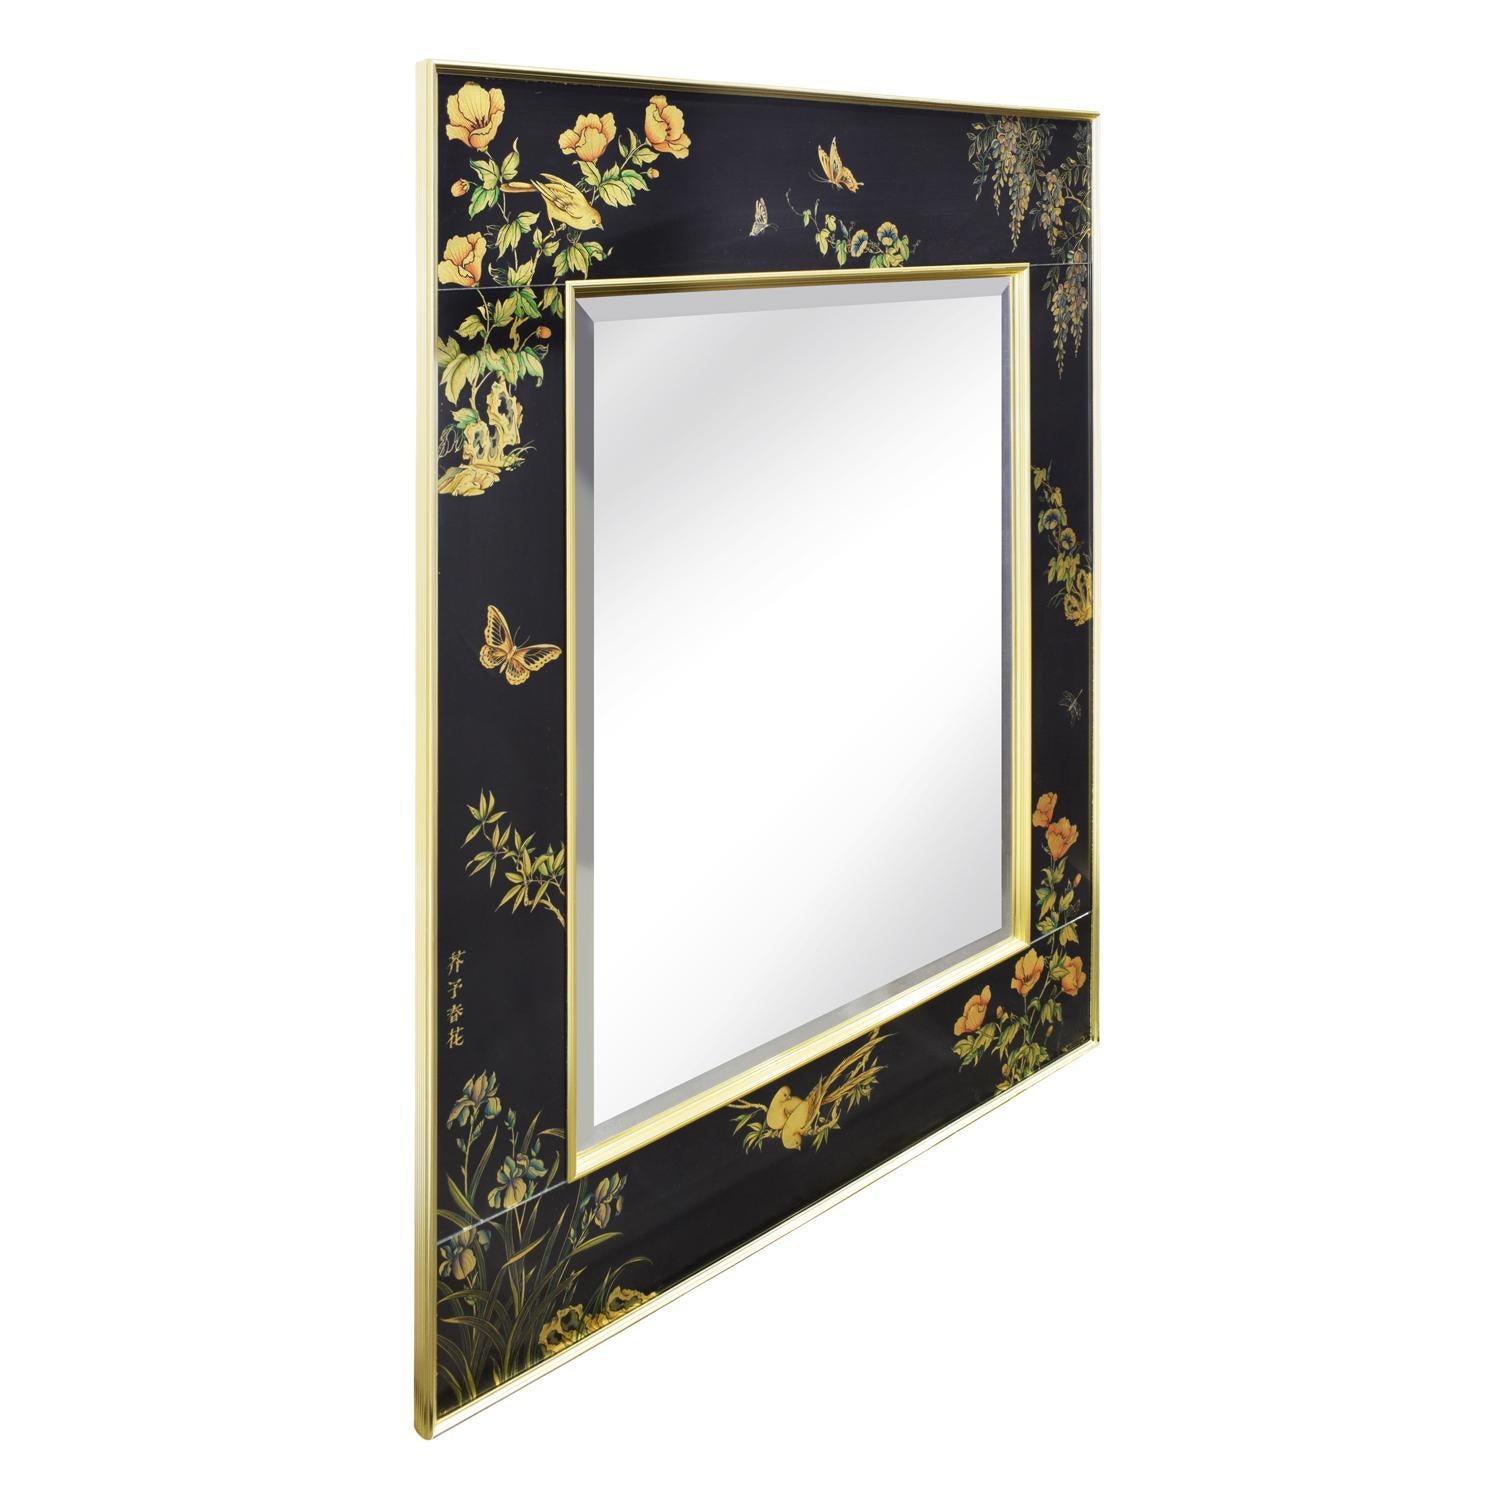 Exquisite artisan reverse panted mirror with butterfly motif and Chinese symbols with gilded frame by Broner, American, 1983 (signed and dated). This mirror is a work of art. The framed mirror is beveled.